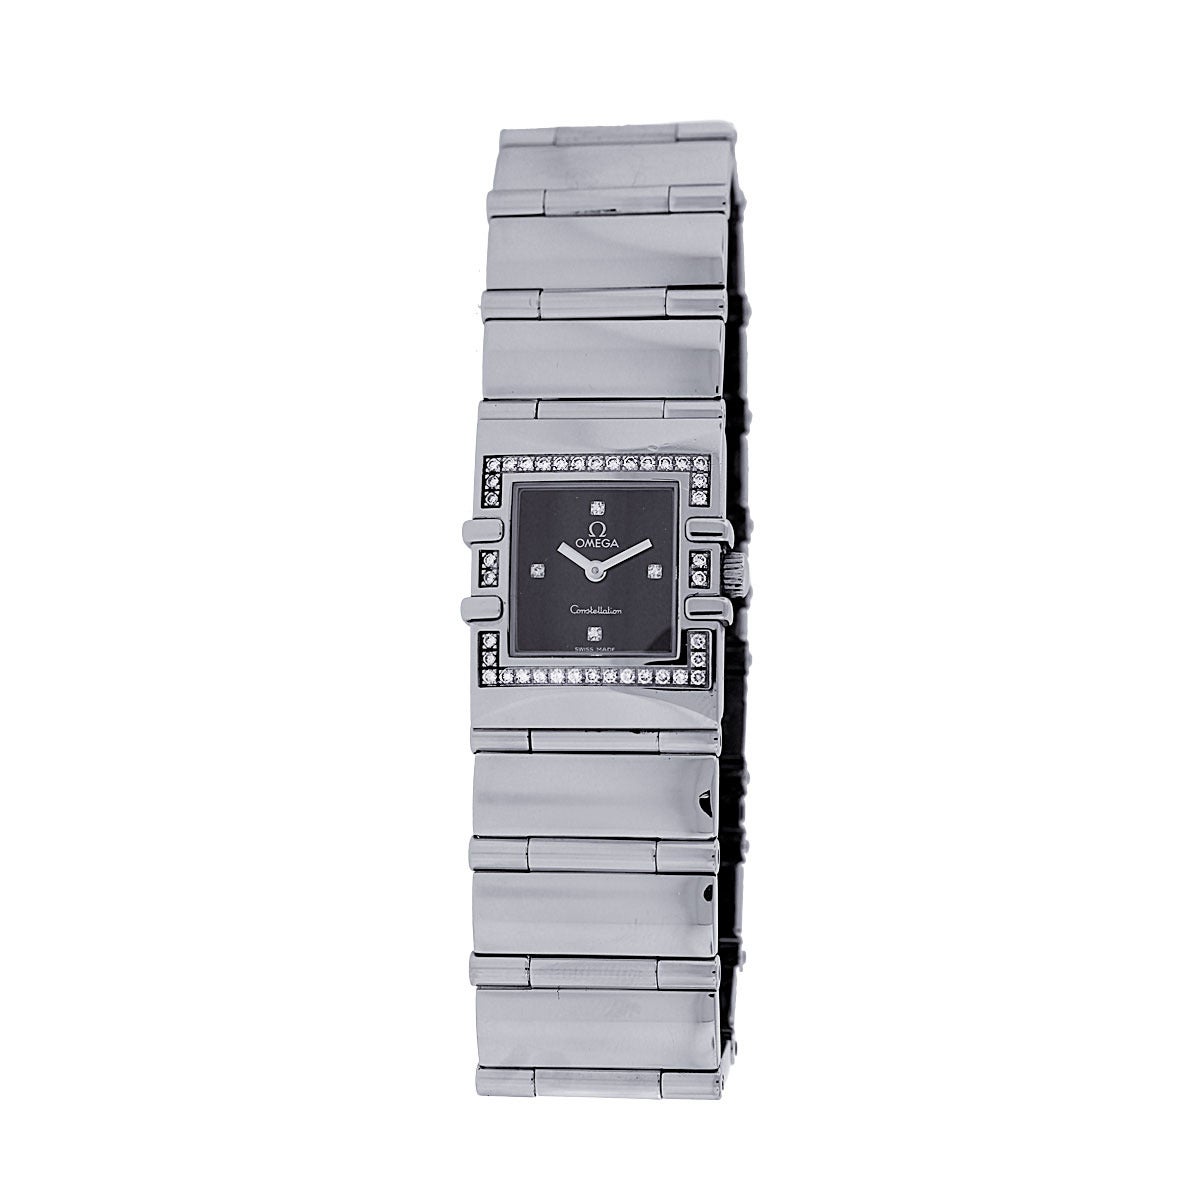 Brand: Omega
Model:  Constellation Diamond Bezel Black Dial Ladies Watch
Material: Stainless Steel
Dial: Black Dial
Bezel: Diamond bezel. Diamonds are G in Color and VS in clarity
Case Measurements: 22mm
Band Material : Stainless Steel
Clasp: